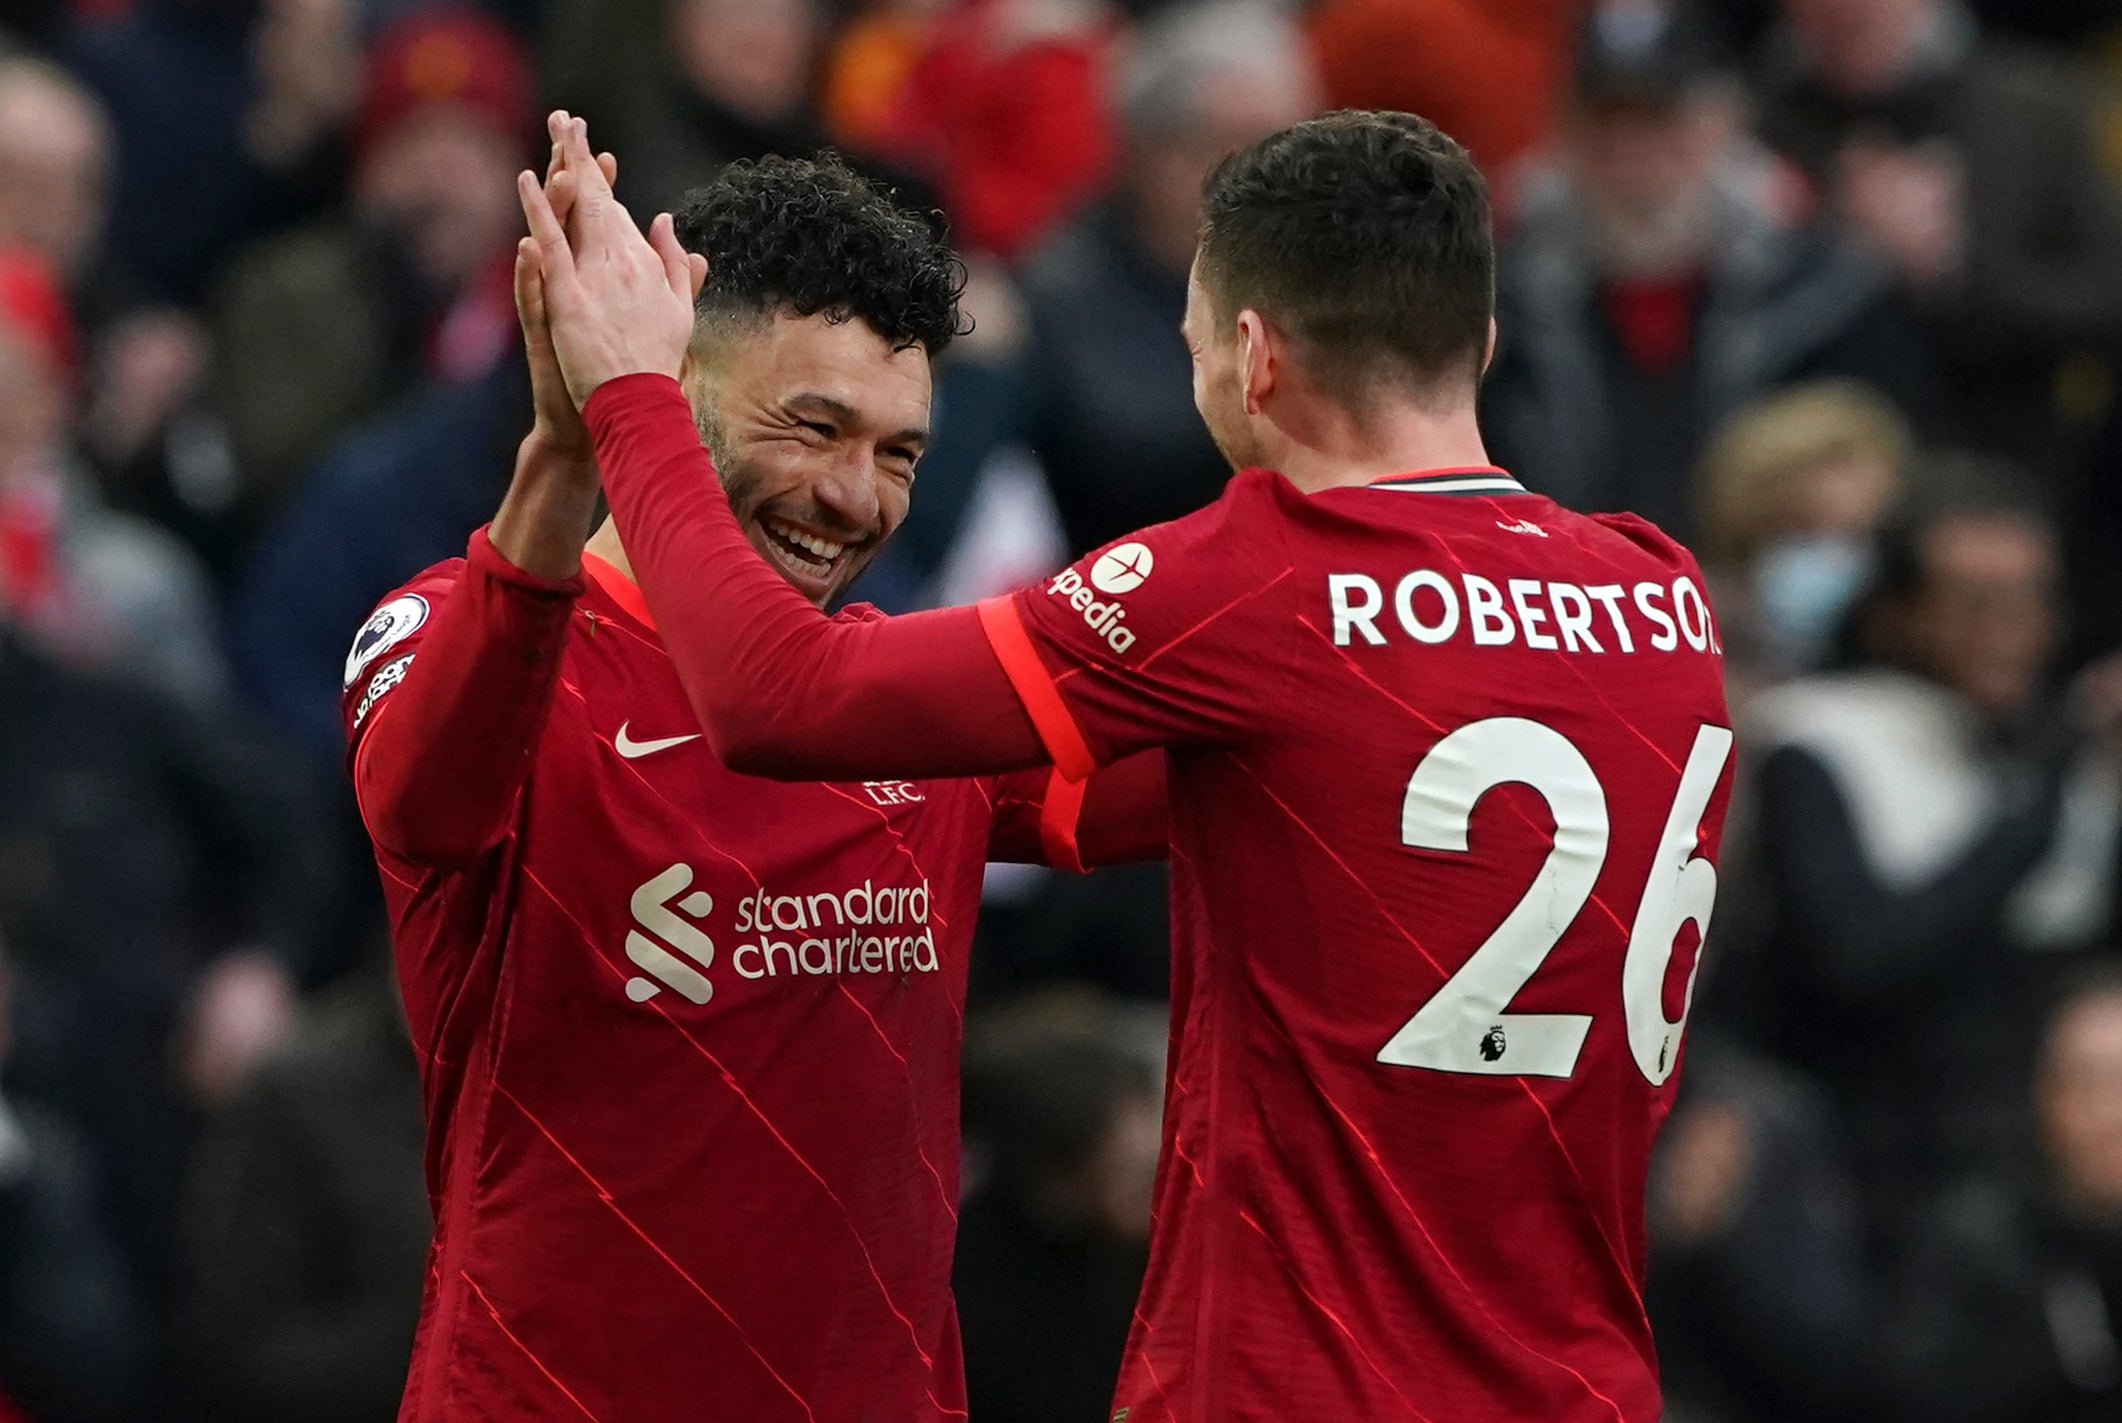 Alex Oxlade-Chamberlain (left) celebrates with Andrew Robertson after scoring in Liverpool’s 3-0 victory over Brentford on Sunday (Peter Byrne/PA)